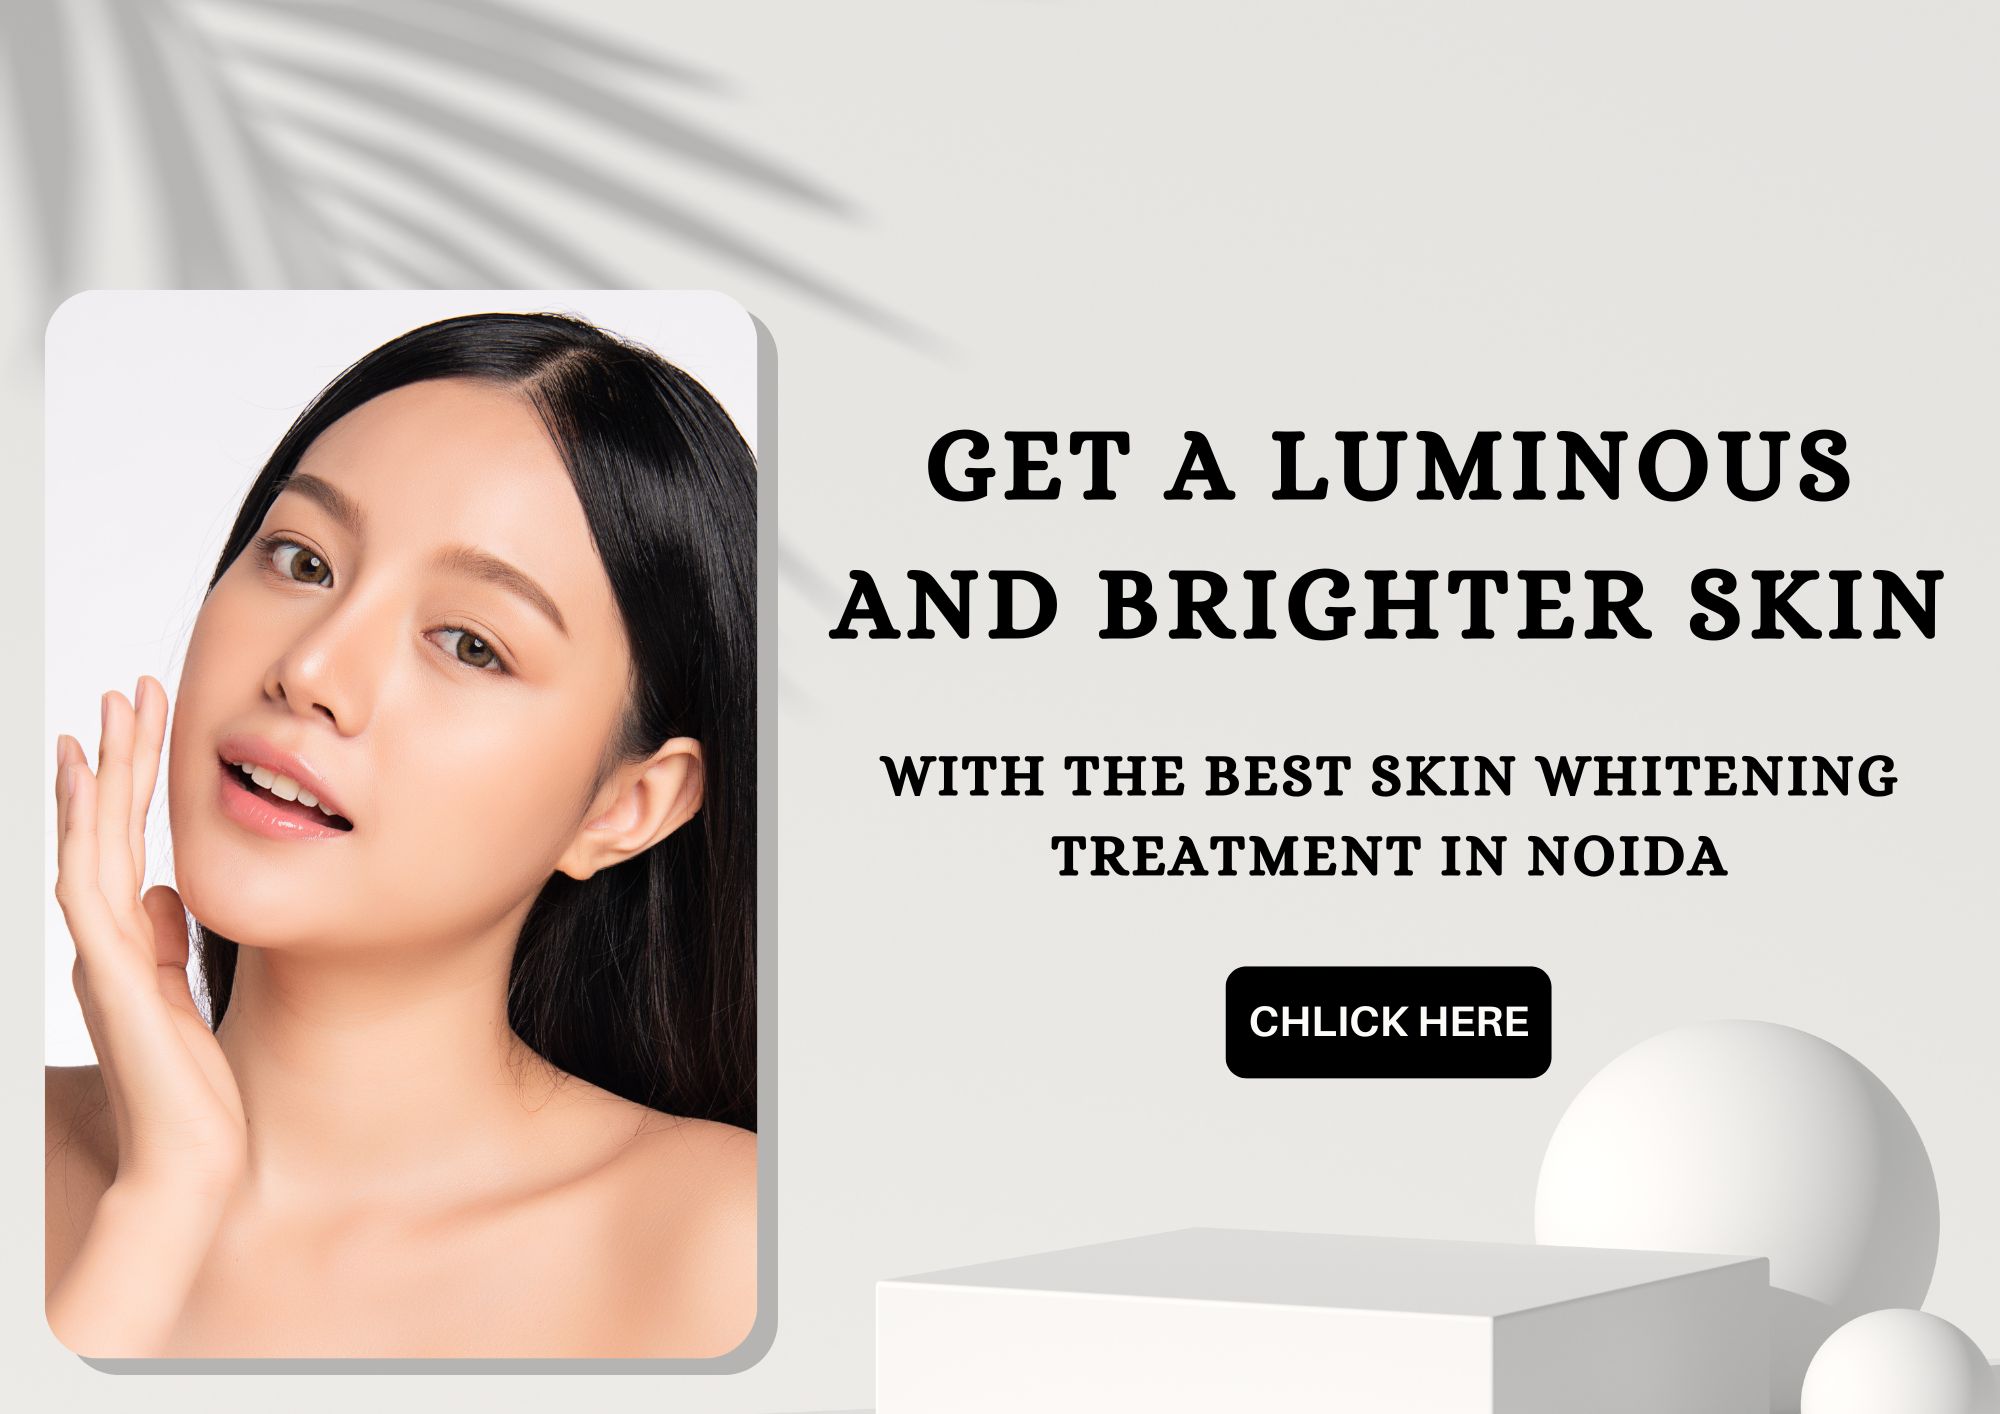 Get a Luminous and Brighter Skin